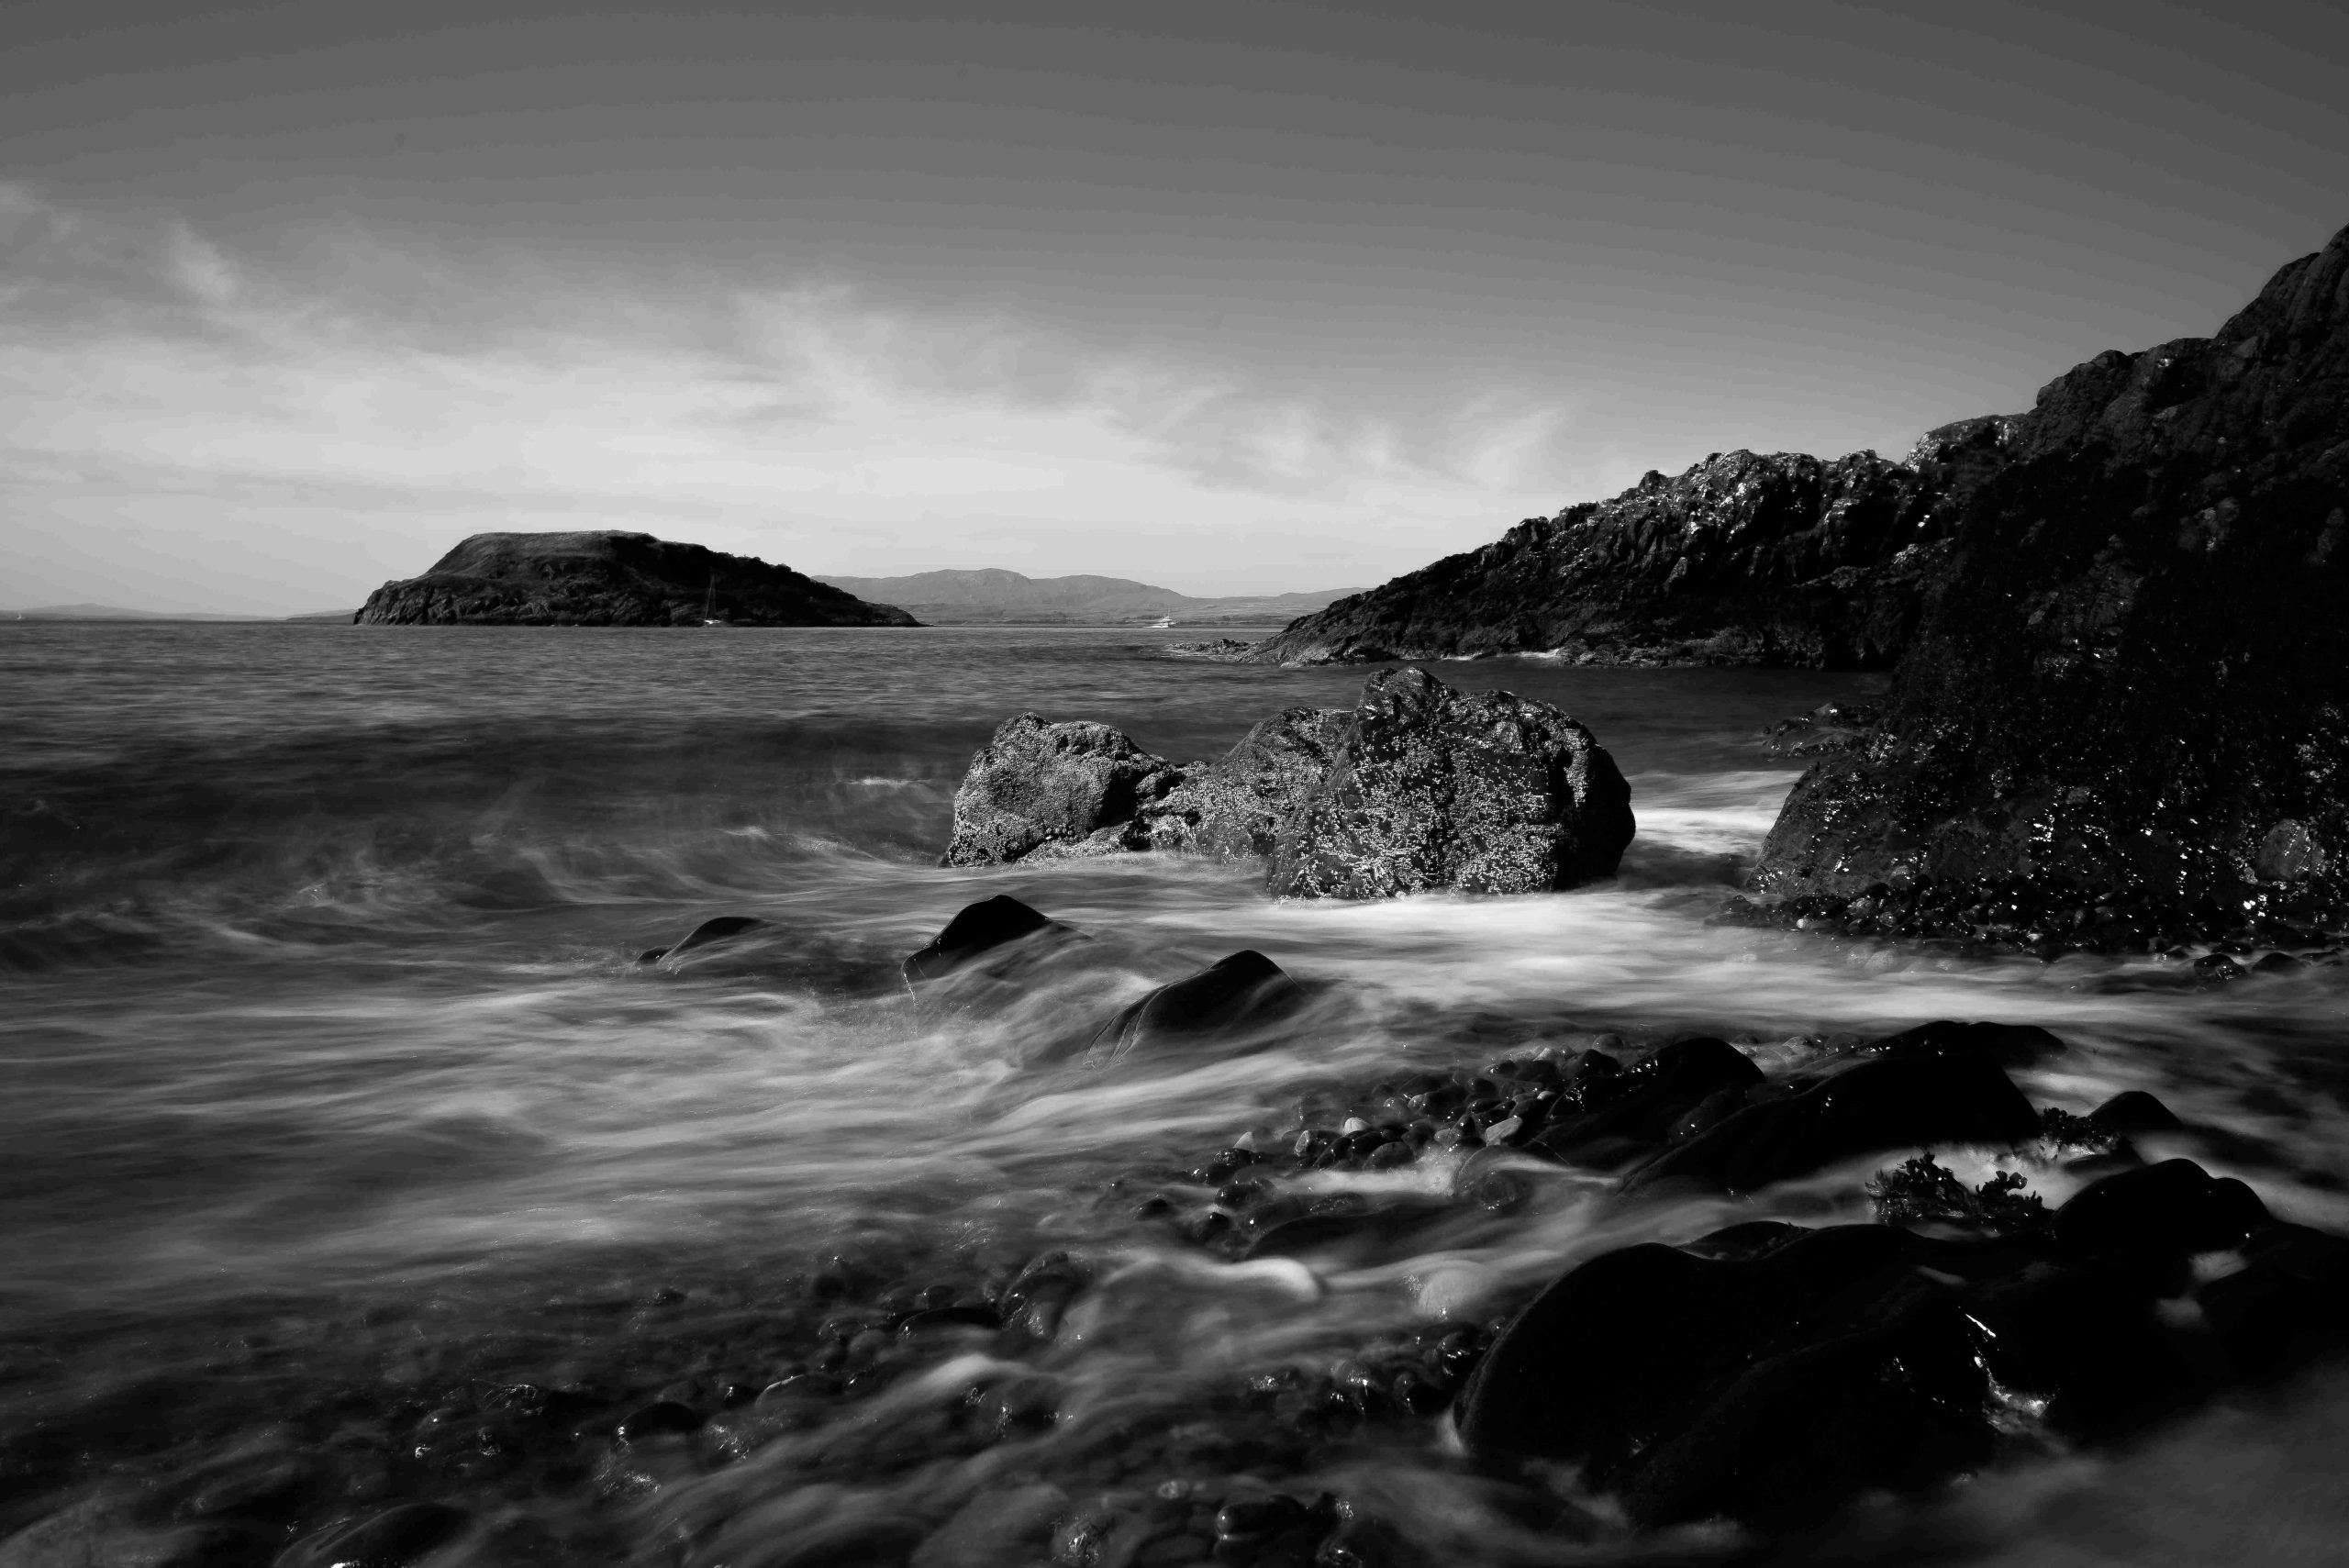 Black and white photograph of waves crashing on a rocky beach, with islands in the background